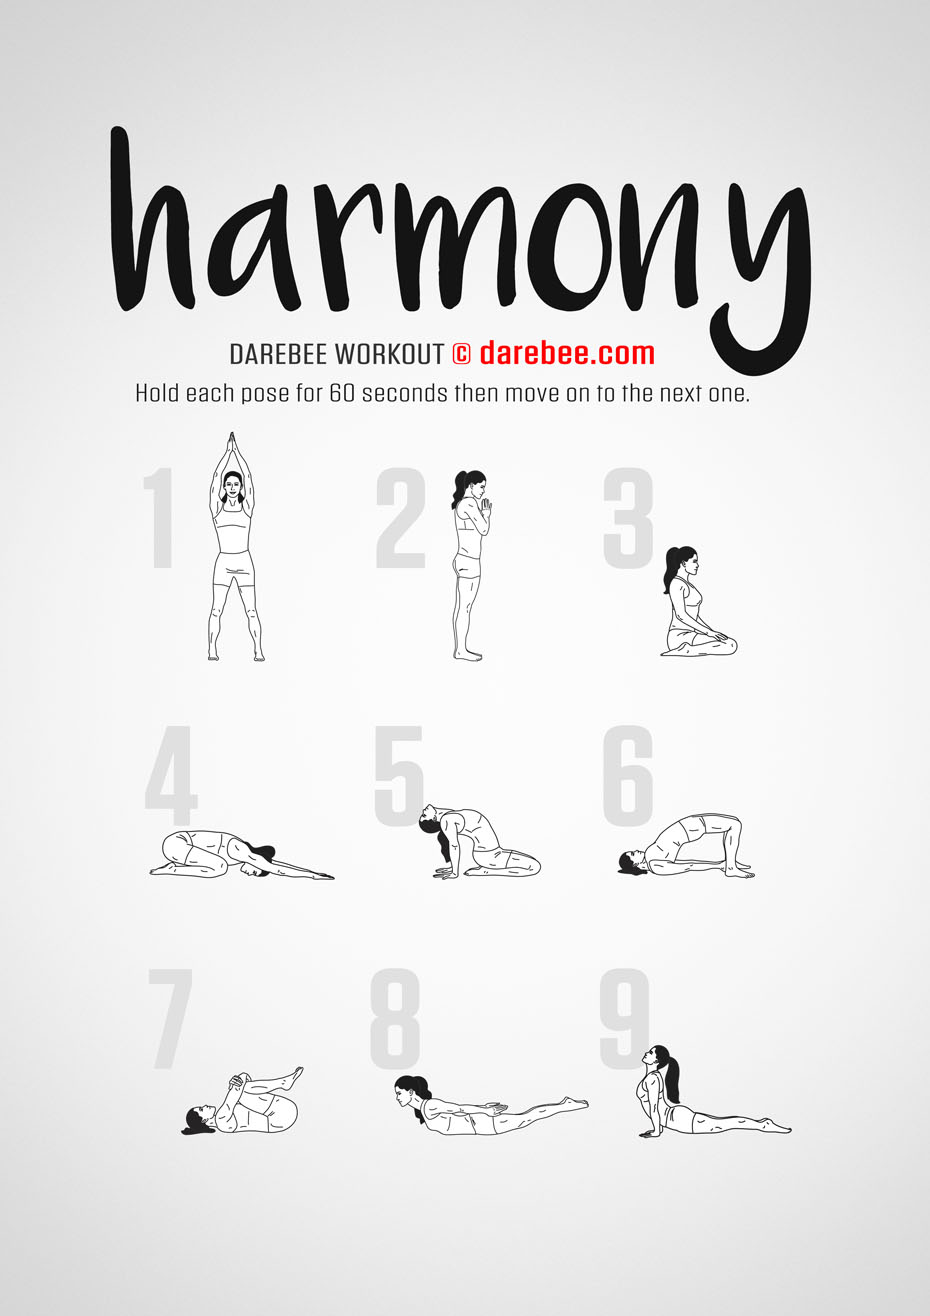 Harmony is a Darebee home fitness, yoga-based workout that's just perfect for those days when what you need most is to re-center yourself.